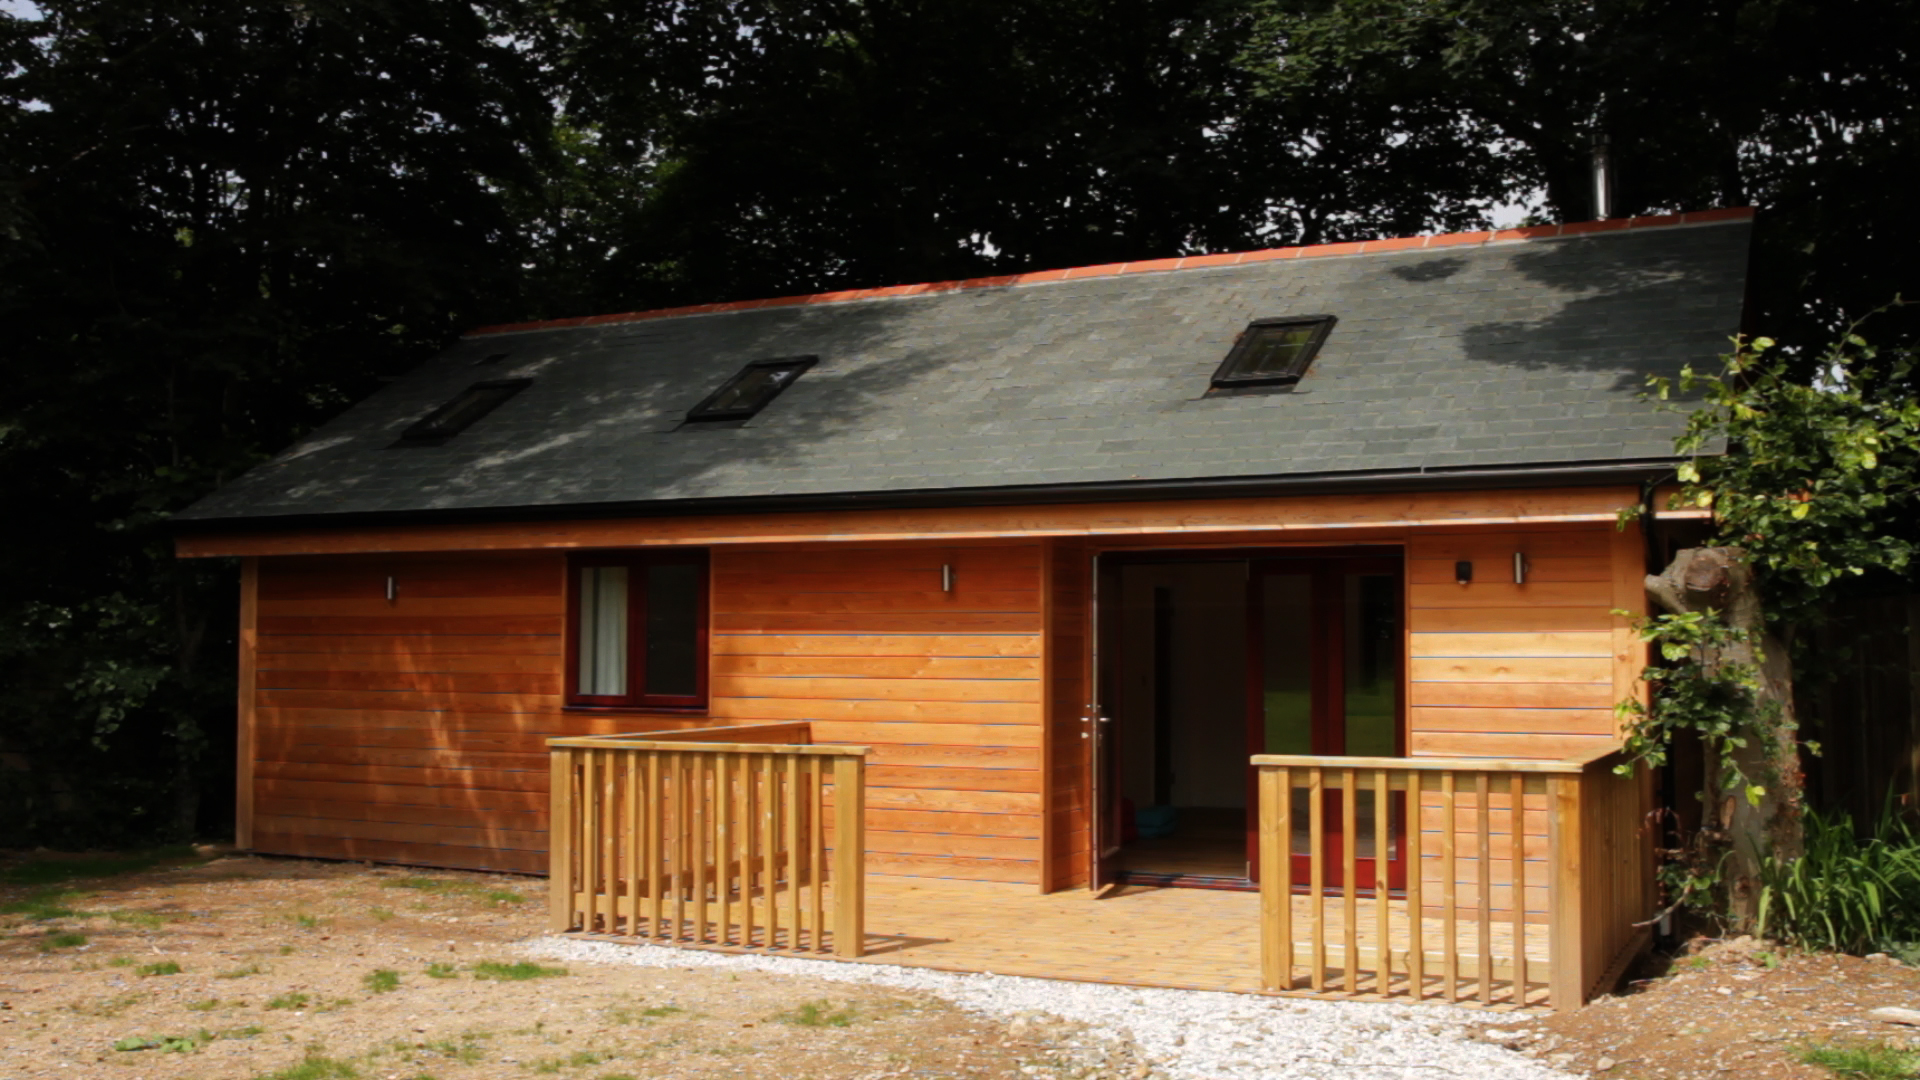 Two bedroom, timber frame build near St Agnes, Cornwall